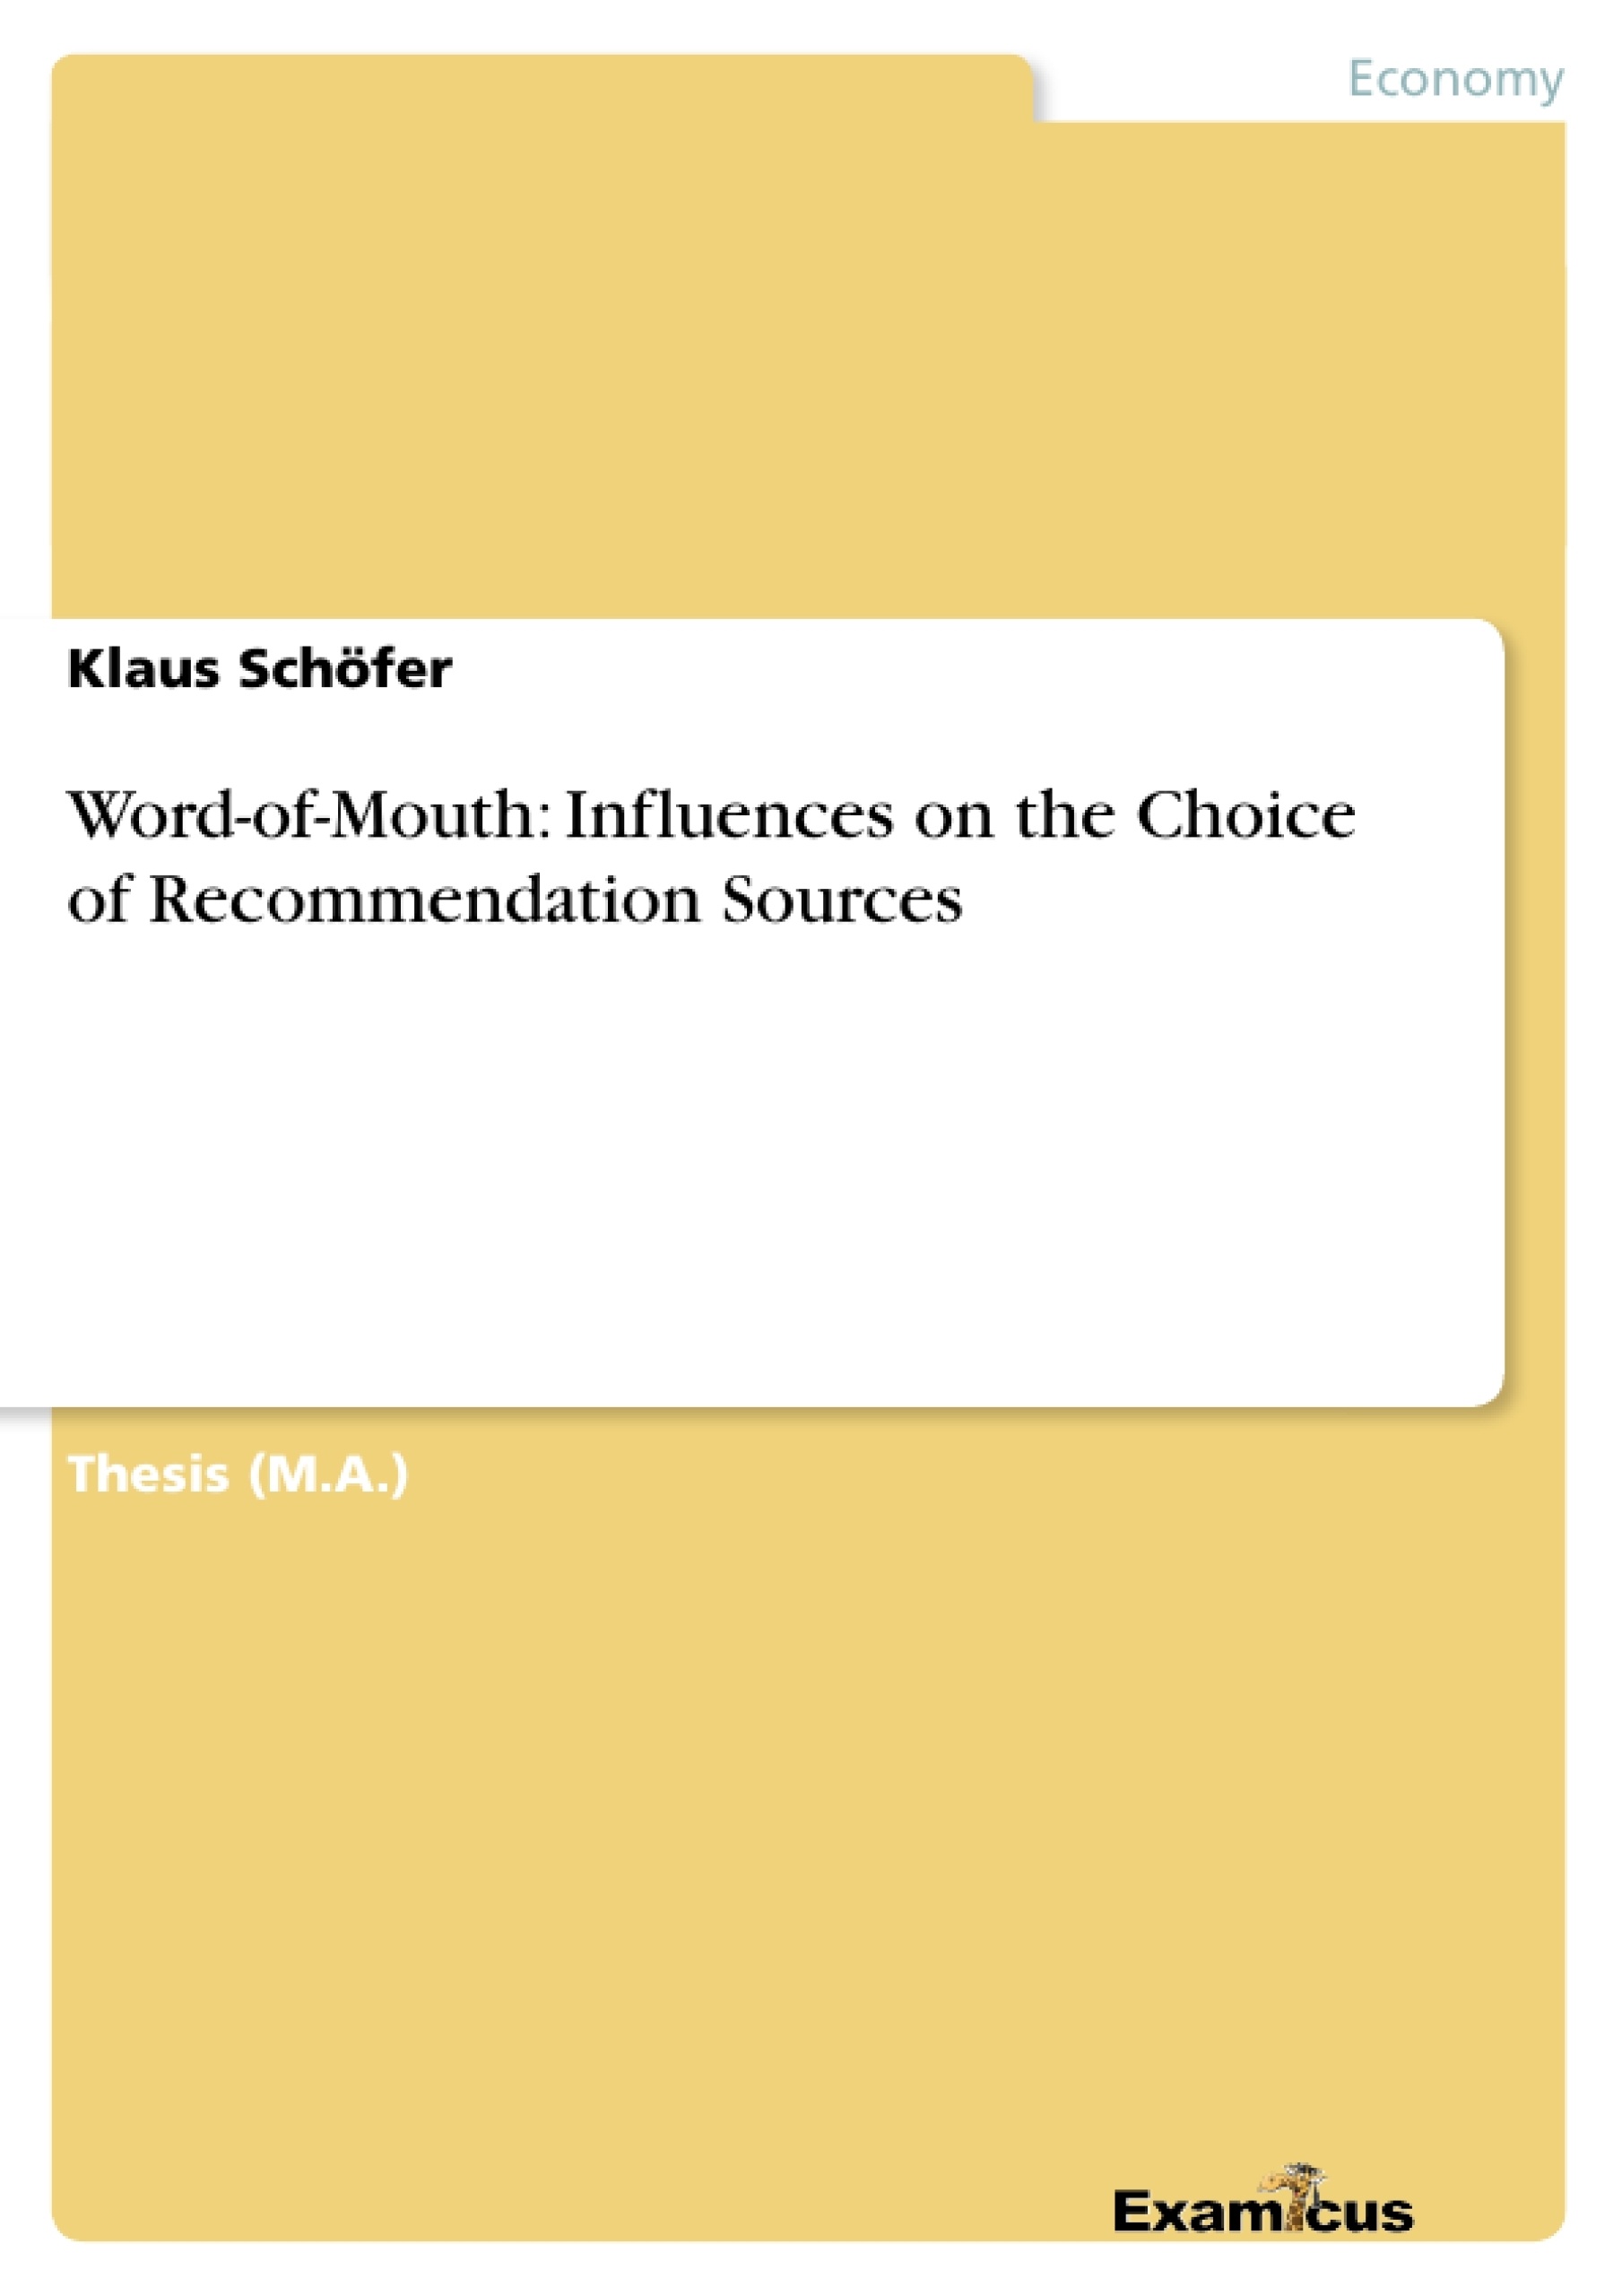 Title: Word-of-Mouth: Influences on the Choice of Recommendation Sources